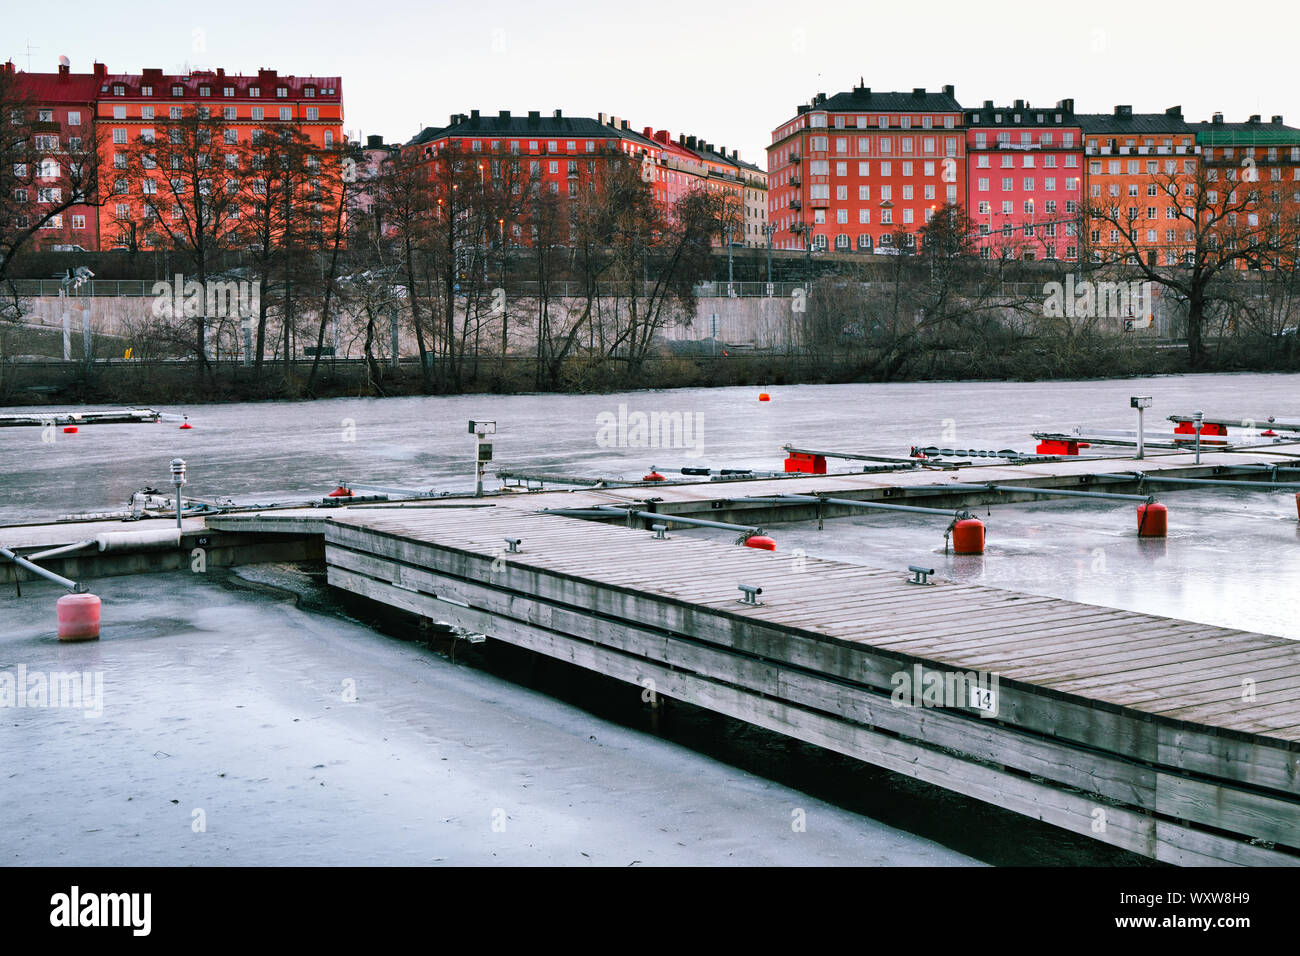 Boat moorings frozen in the ice of Karlberg Lake (Karlbergssjon) with colourful facades of the Atlas district houses, Norrmalm, Stockholm, Sweden Stock Photo